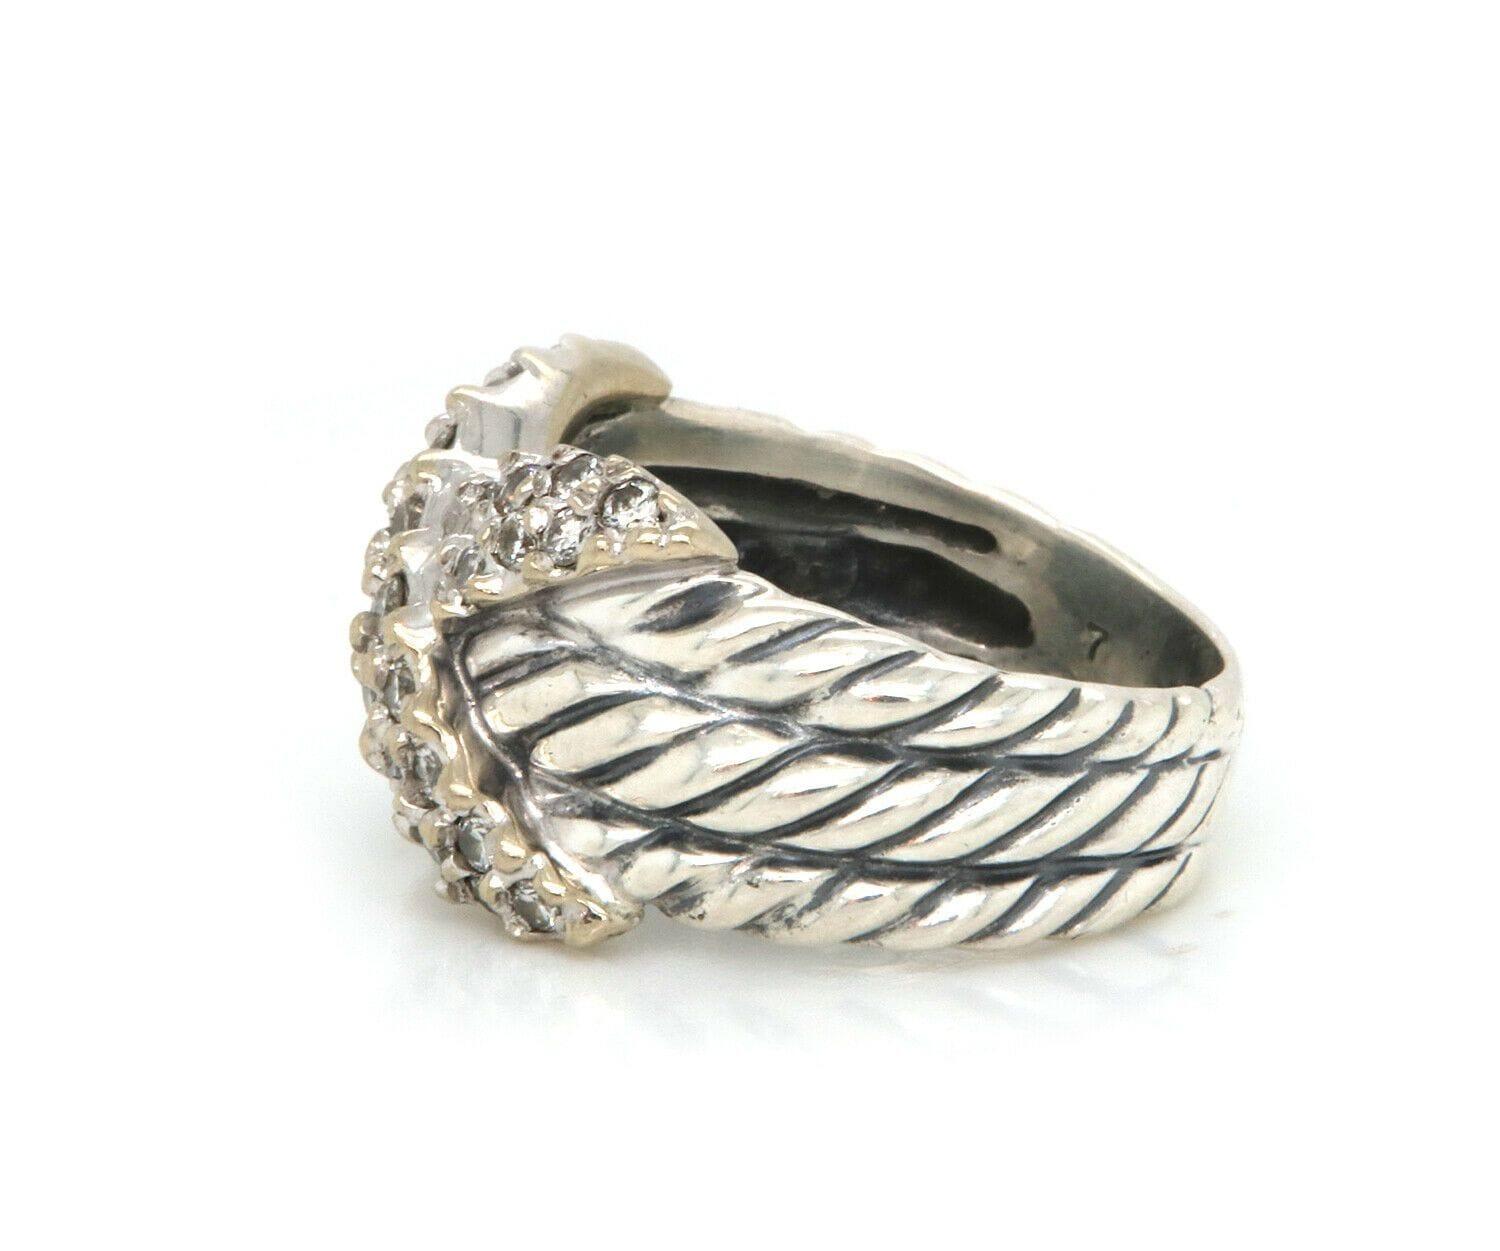 David Yurman 0.65ctw Diamond X Ring in 18K

David Yurman Diamond X Ring
18K White Gold
Diamonds Carat Weight: Approx. 0.65ctw
Ring Size: 6.75 (US)
Weight: Approx. 6.90 Grams
Stamped: ©D.YURMAN, 18K

Condition:
Offered for your consideration is a